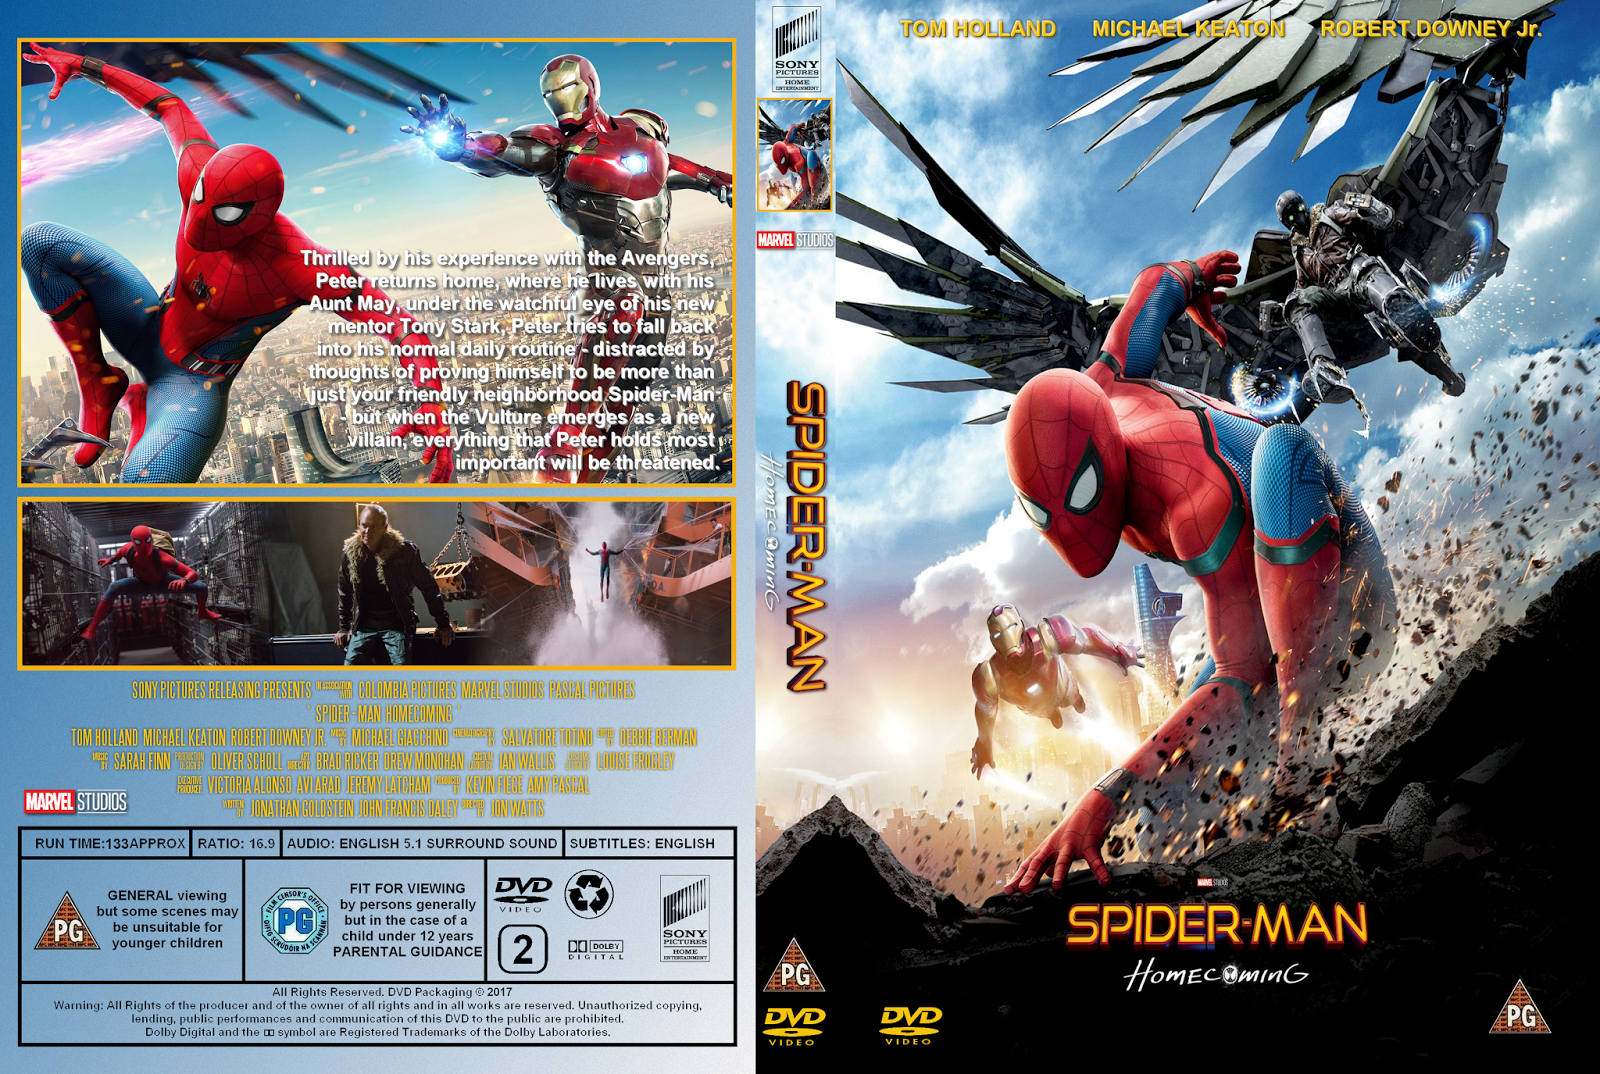 Spider - Man Homecoming (2017) R2 - Cover & Label DVD Movie.